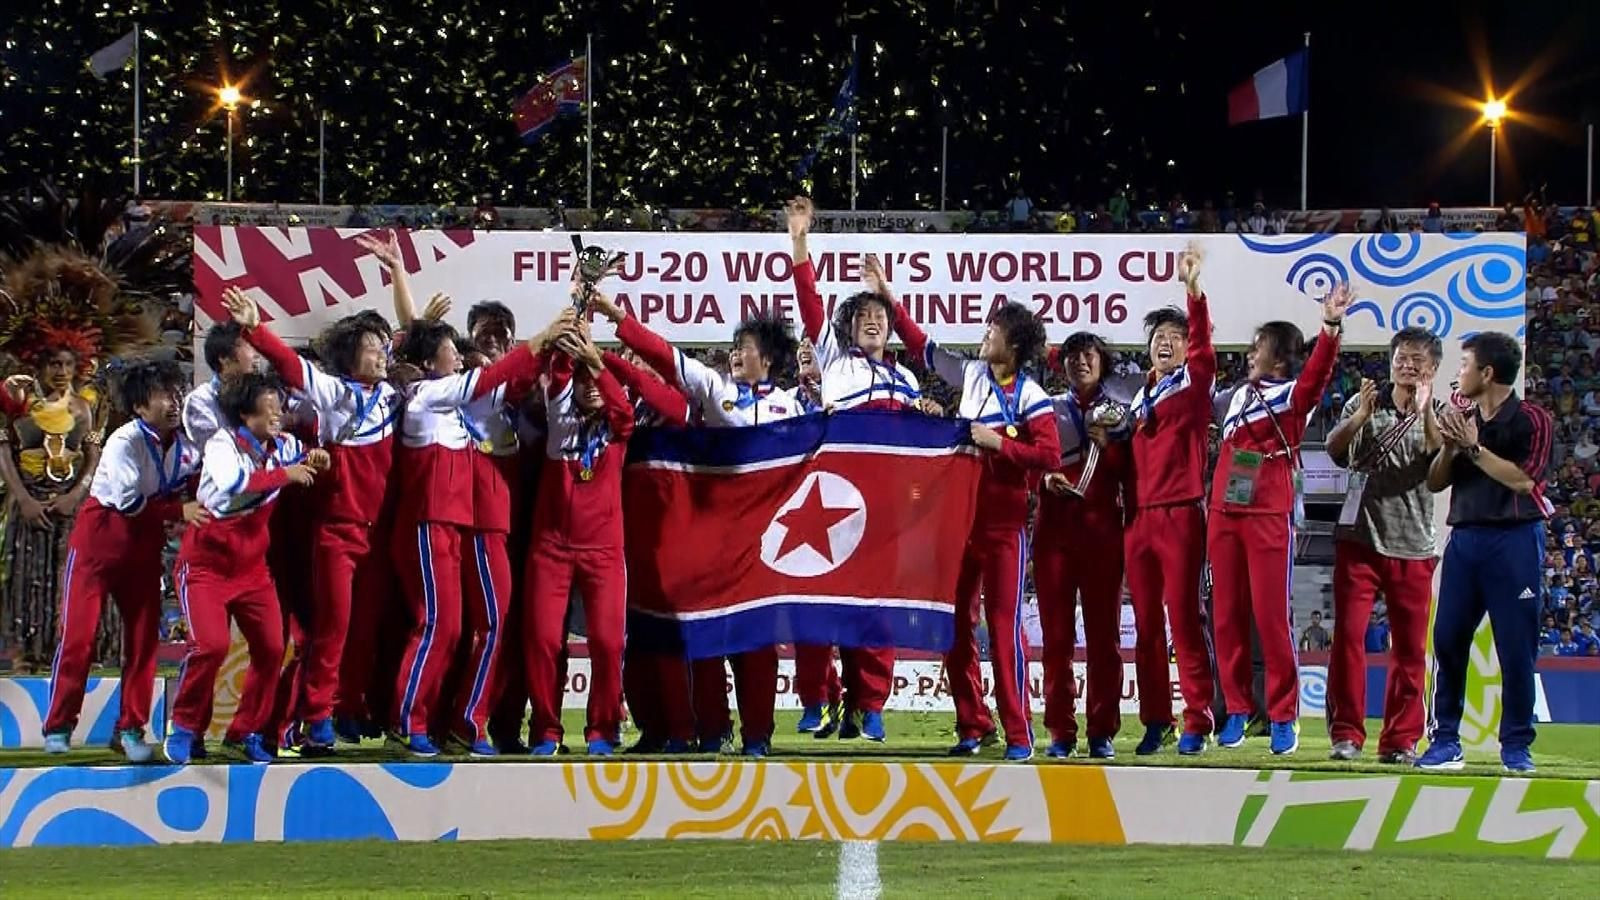 North Korea celebrate winning the FIFA Under-20 Women's World Cup in Papua New Guinea in 2016 but the tournament has since been overshadowed by allegations of corruption ©Getty Images